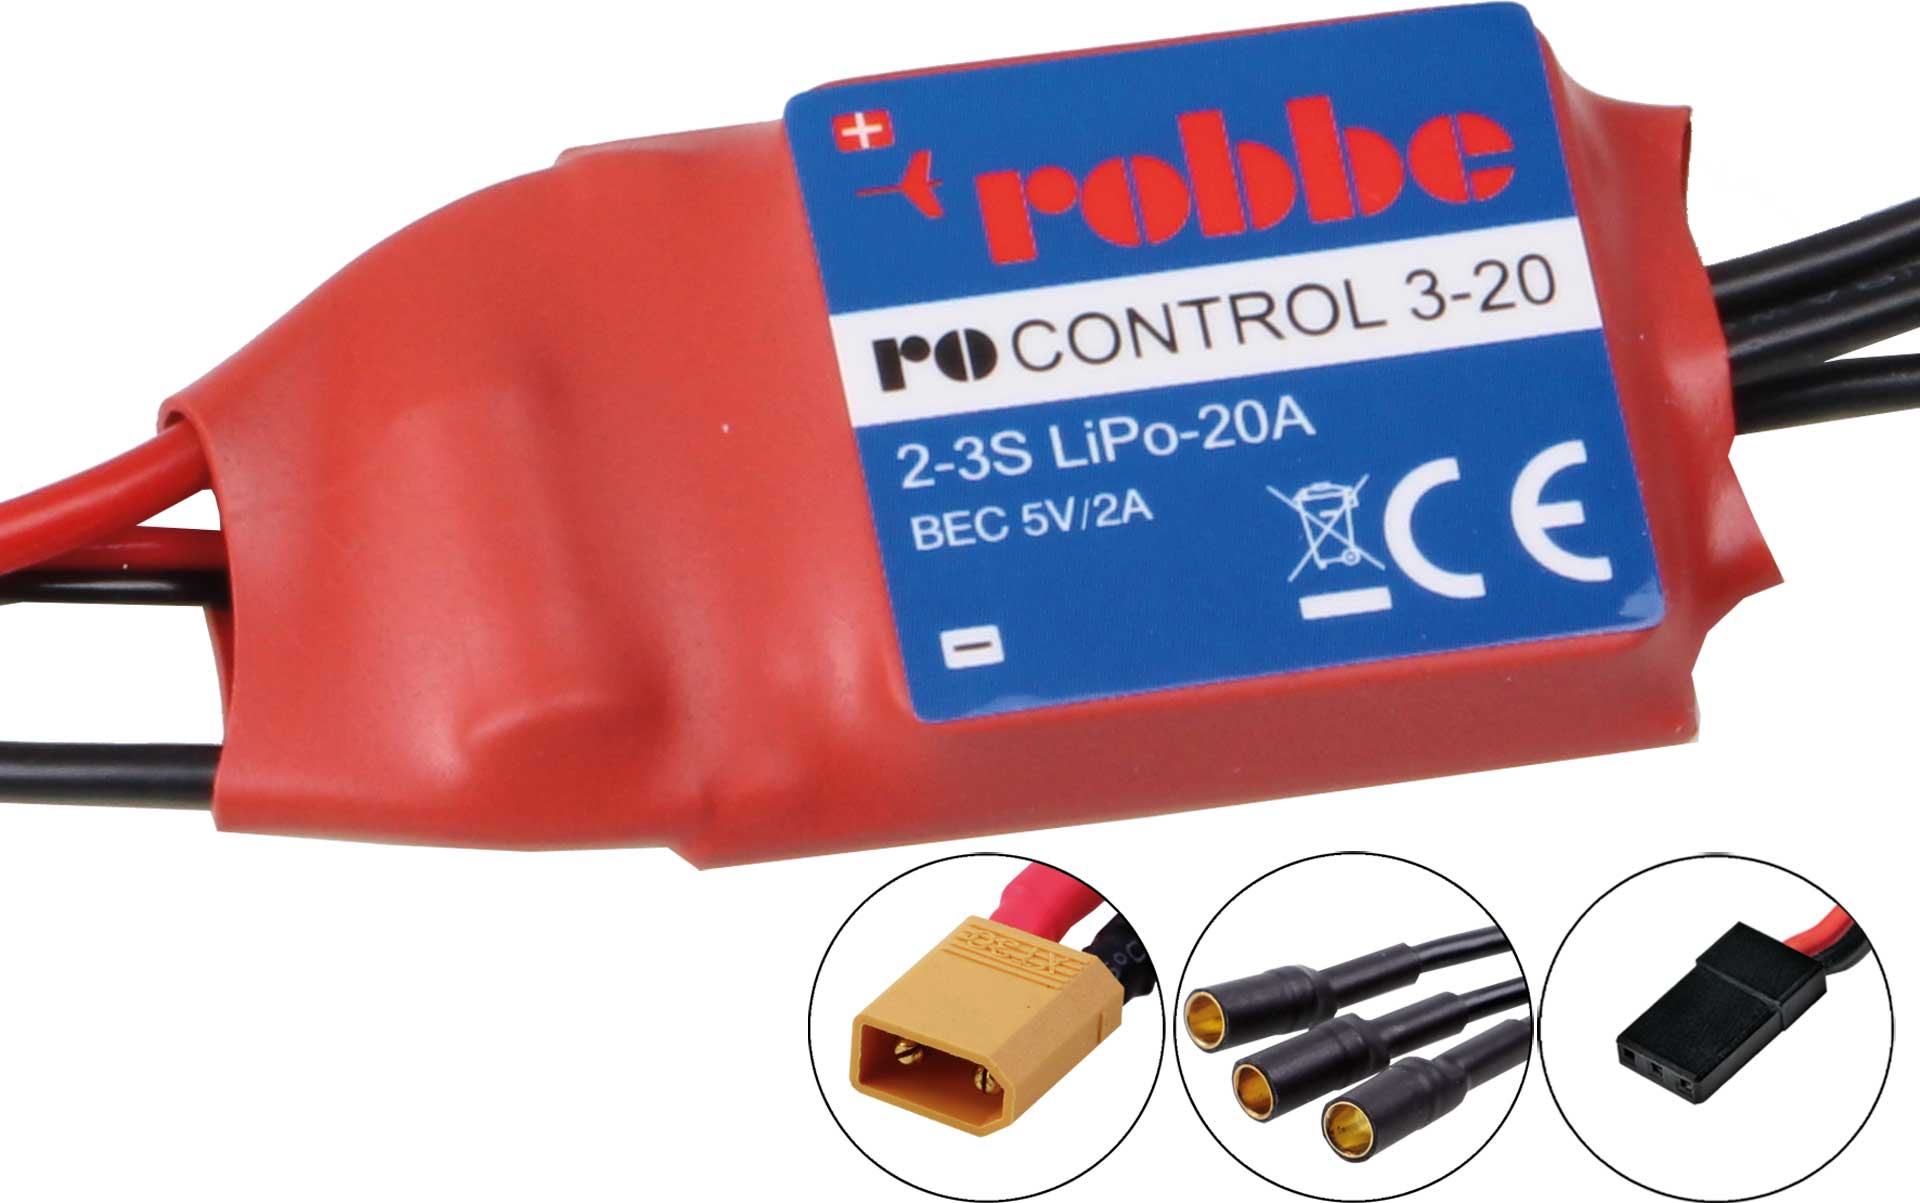 Robbe Modellsport RO-CONTROL 4-20 2-4S -20(25)A BRUSHLESS CONTROLLER 5V/2A BEC